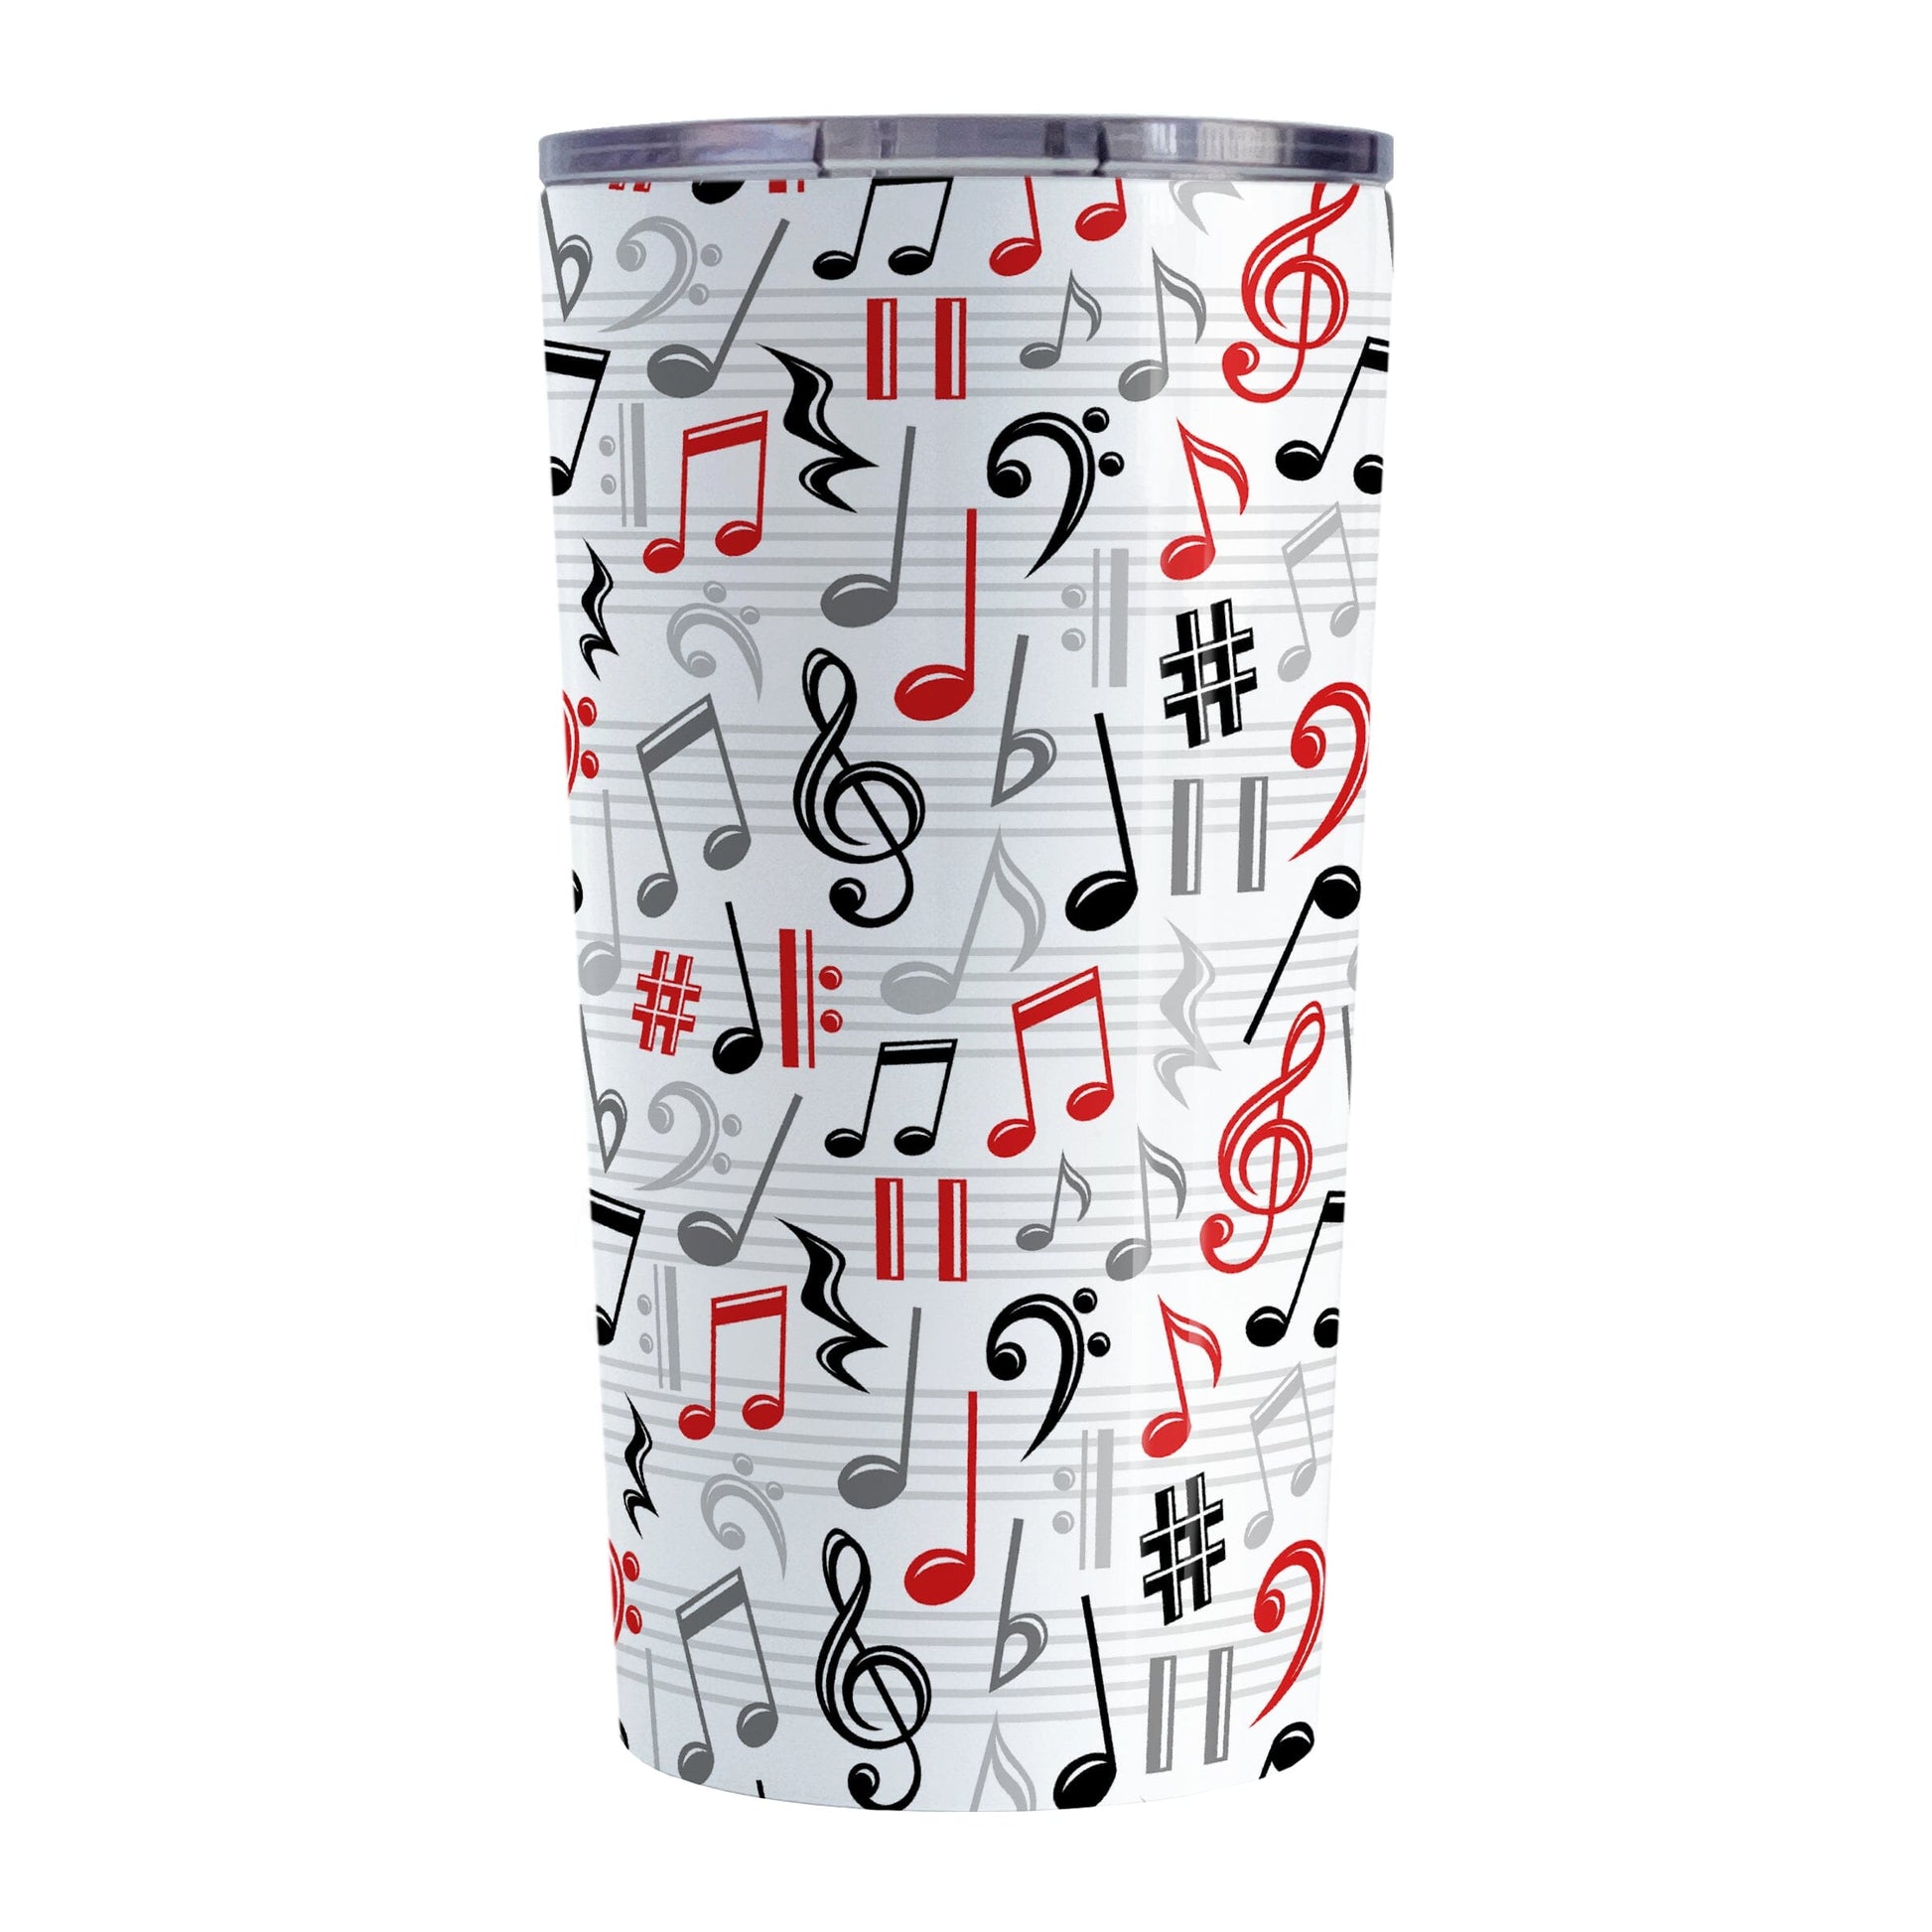 Red Music Notes Pattern Tumbler Cup (20oz) at Amy's Coffee Mugs. A stainless steel tumbler cup designed with music notes and symbols in red, black, and gray in a pattern that wraps around the cup.